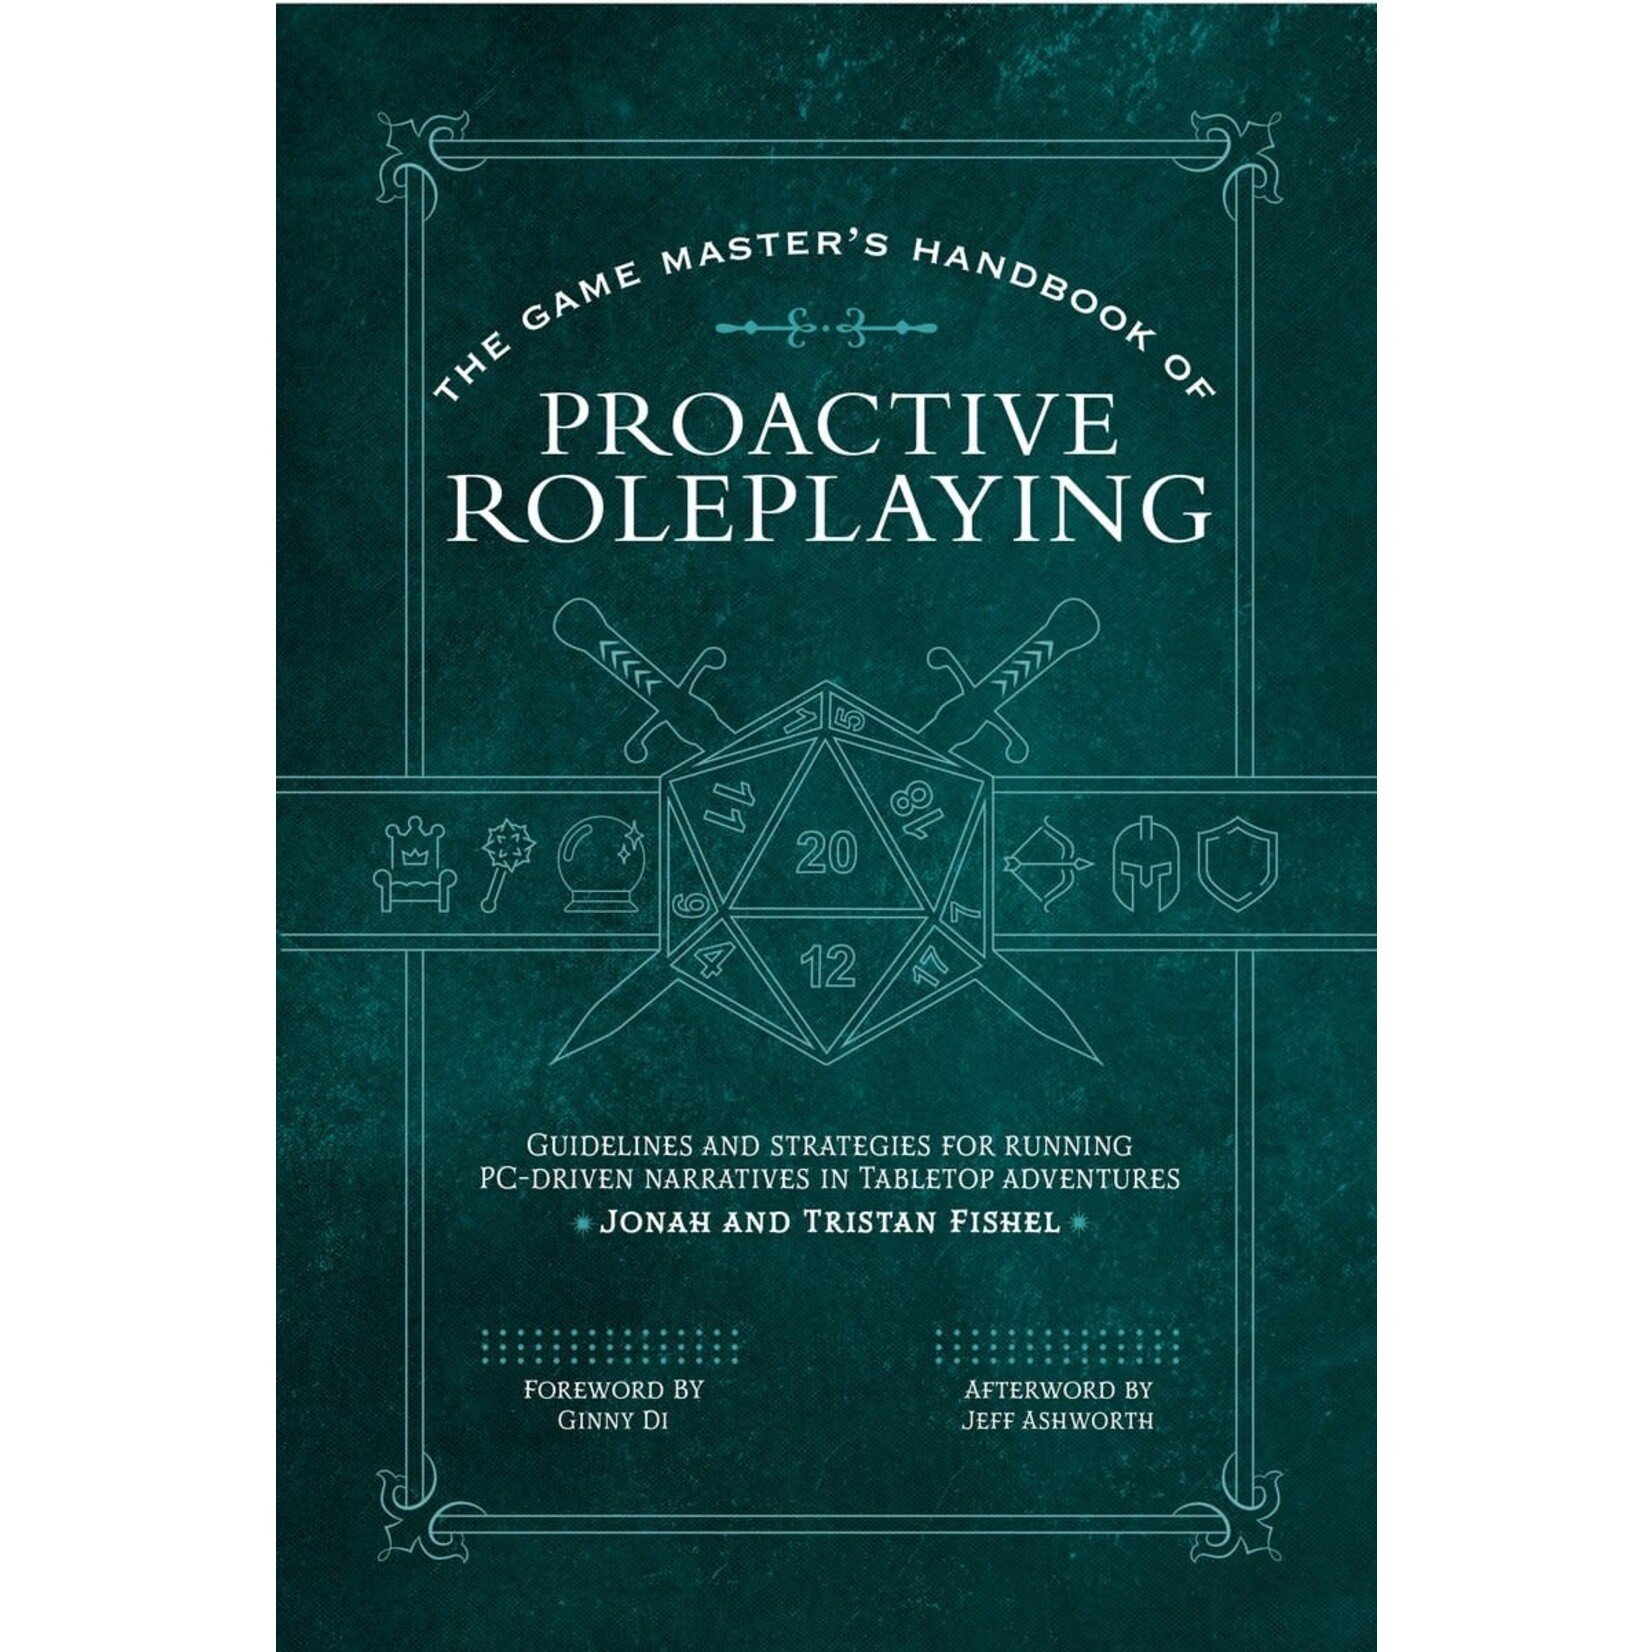 The Game Masters Handbook of Proactive Roleplaying